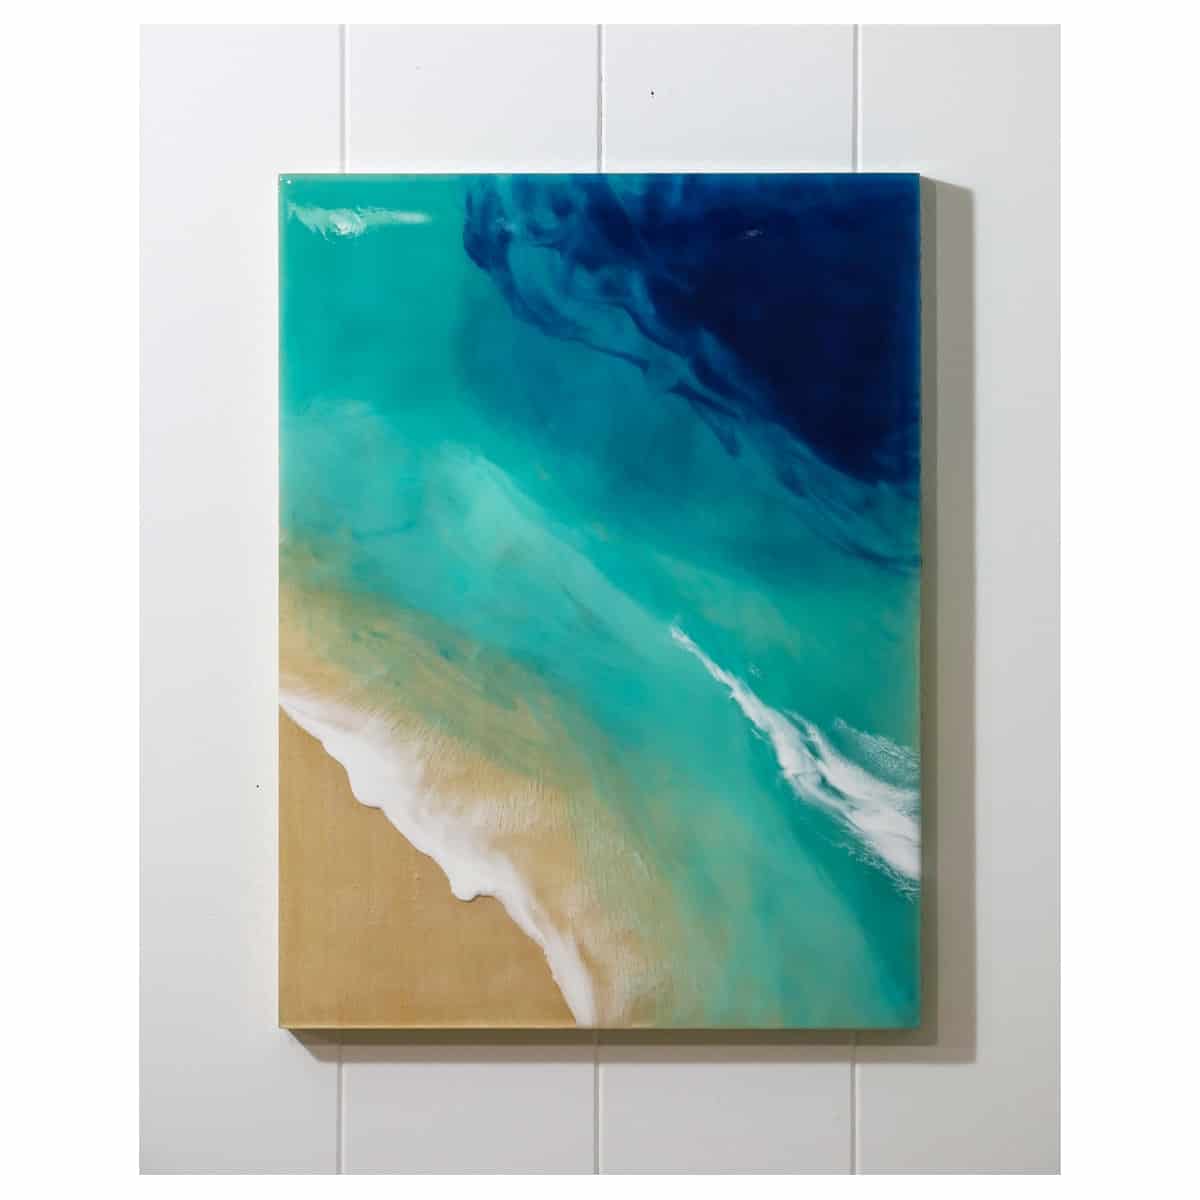 Bree poort unknown abstract original resin painting